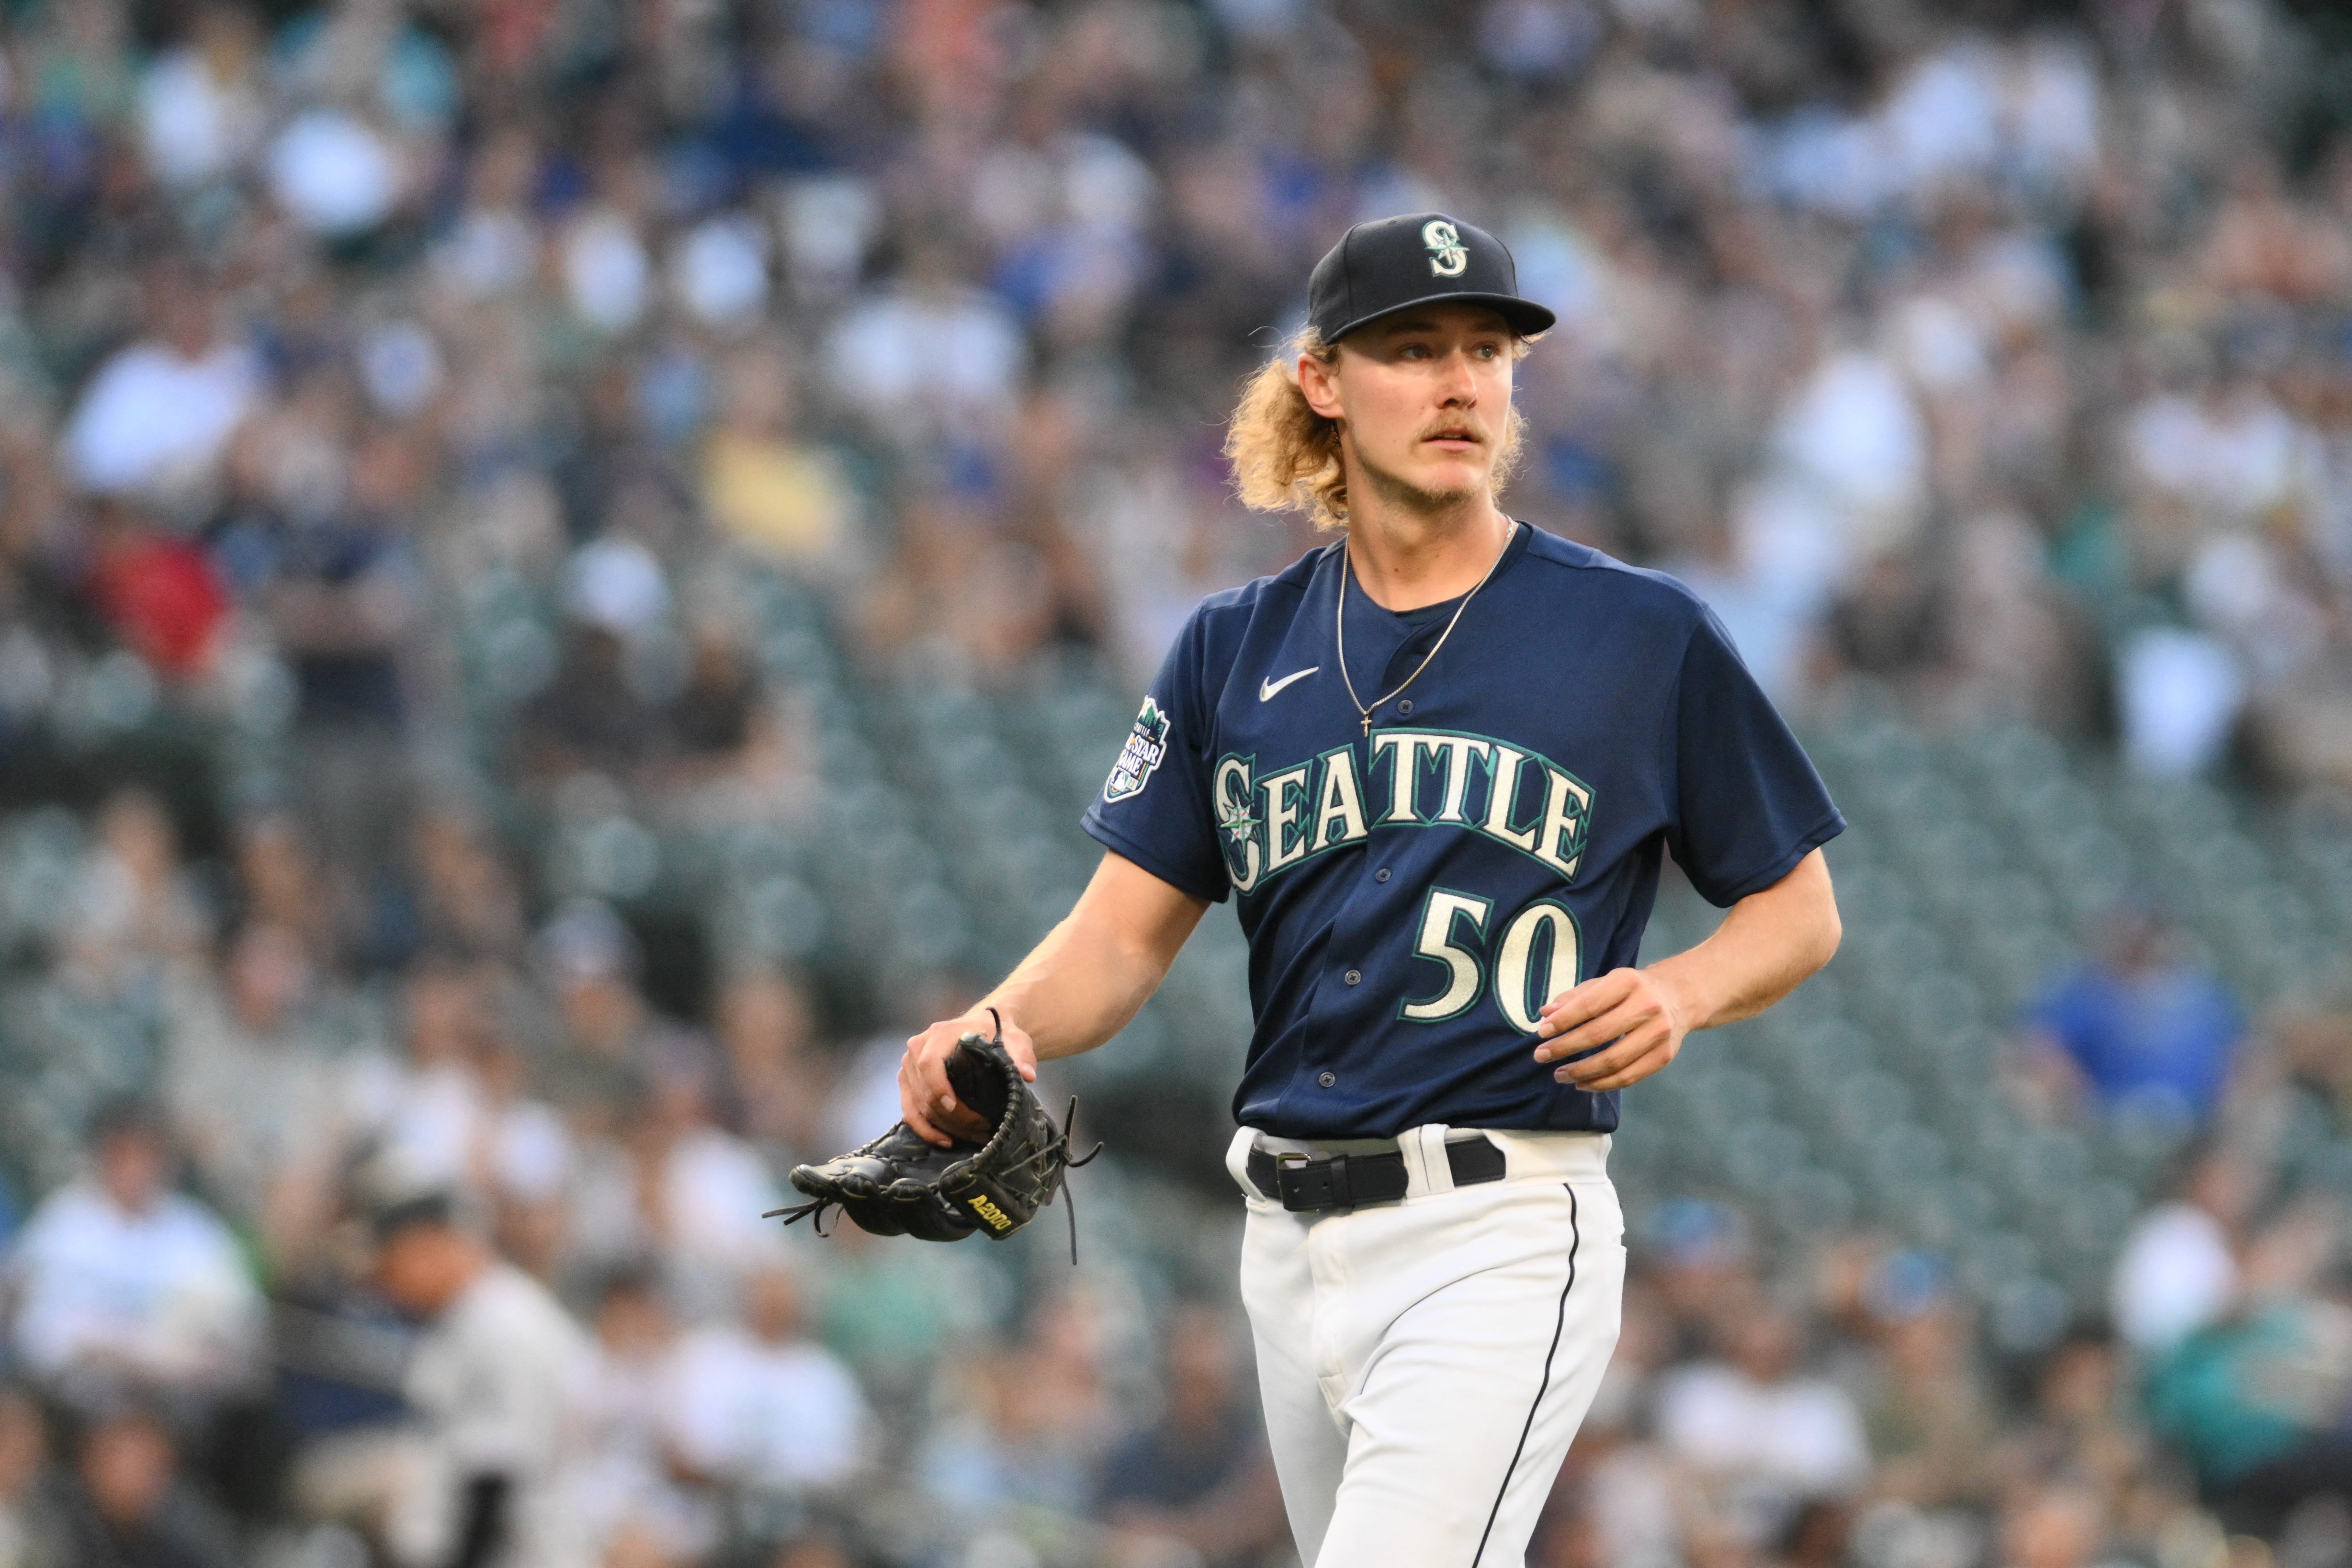 Mariners maul Marlins behind homers, rookie pitcher